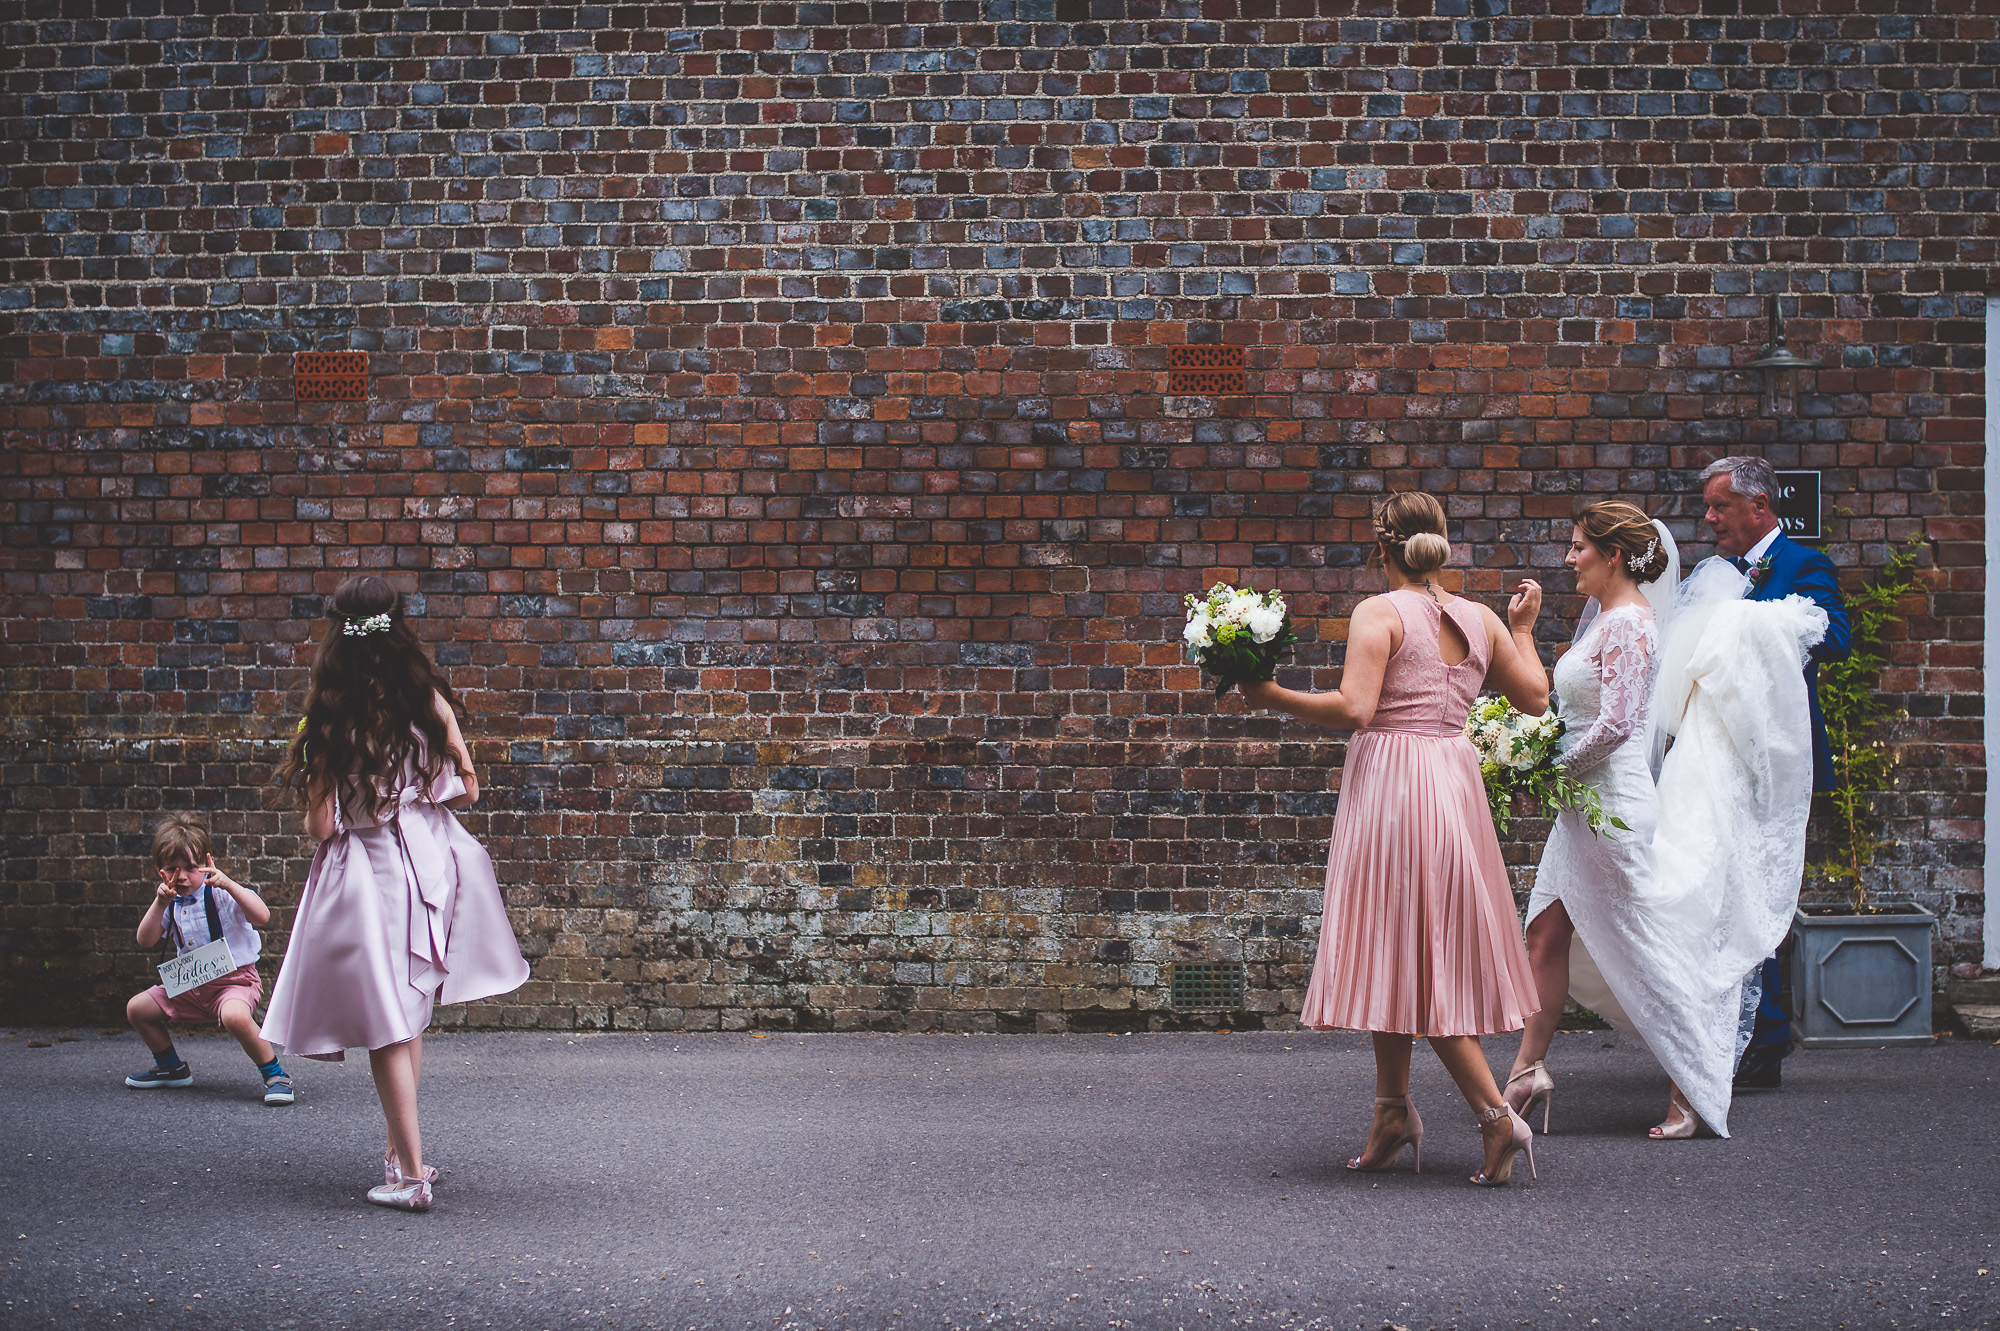 A wedding party featuring the bride and bridesmaids posing in front of a brick wall for the wedding photographer.